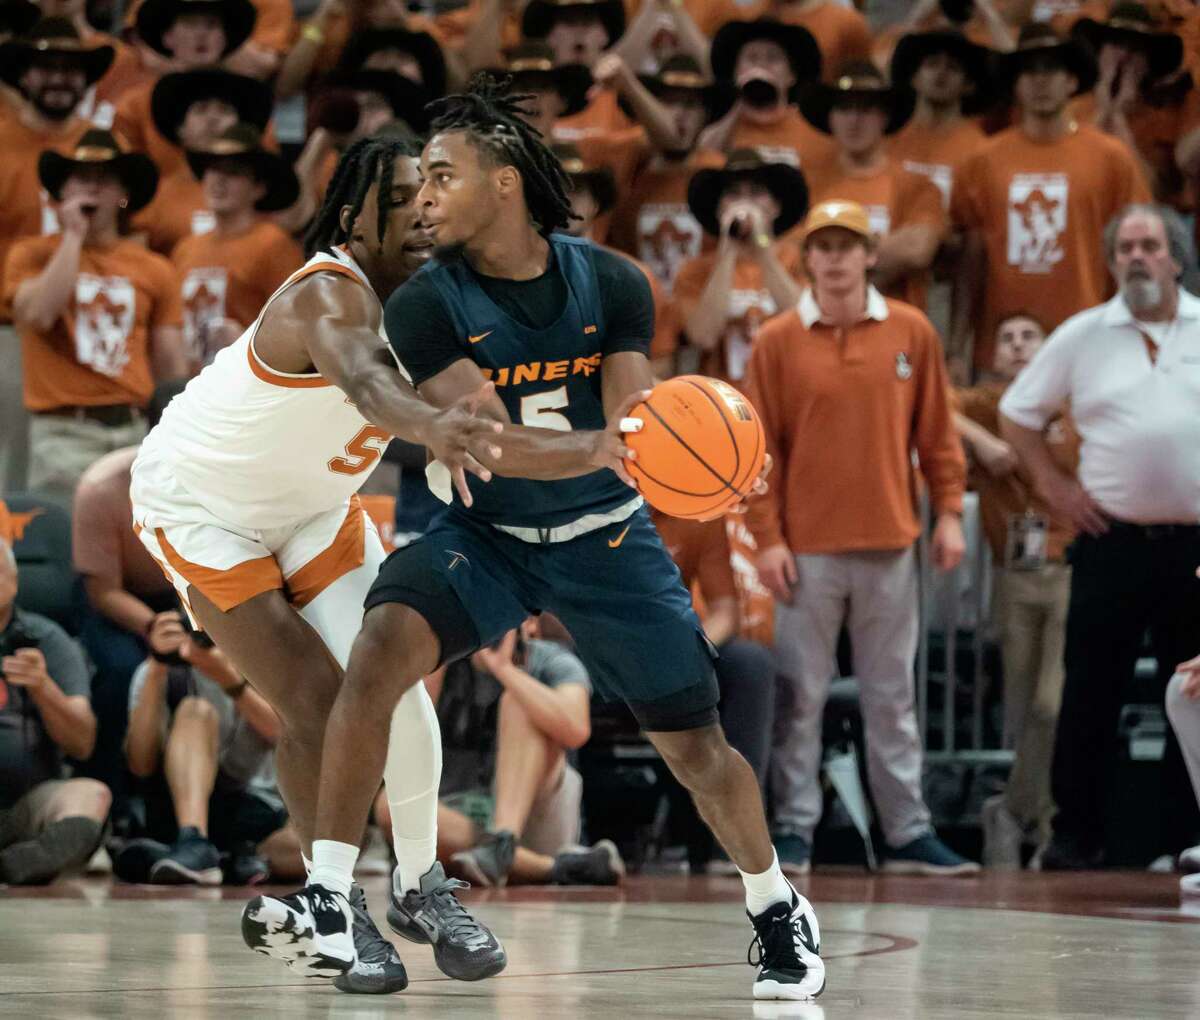 UTEP guard Shamar Givance, right, is defended by Texas guard Marcus Carr, left, during the first half an NCAA college basketball game Monday, Nov. 7, 2022, in Austin, Texas. (AP Photo/Michael Thomas)